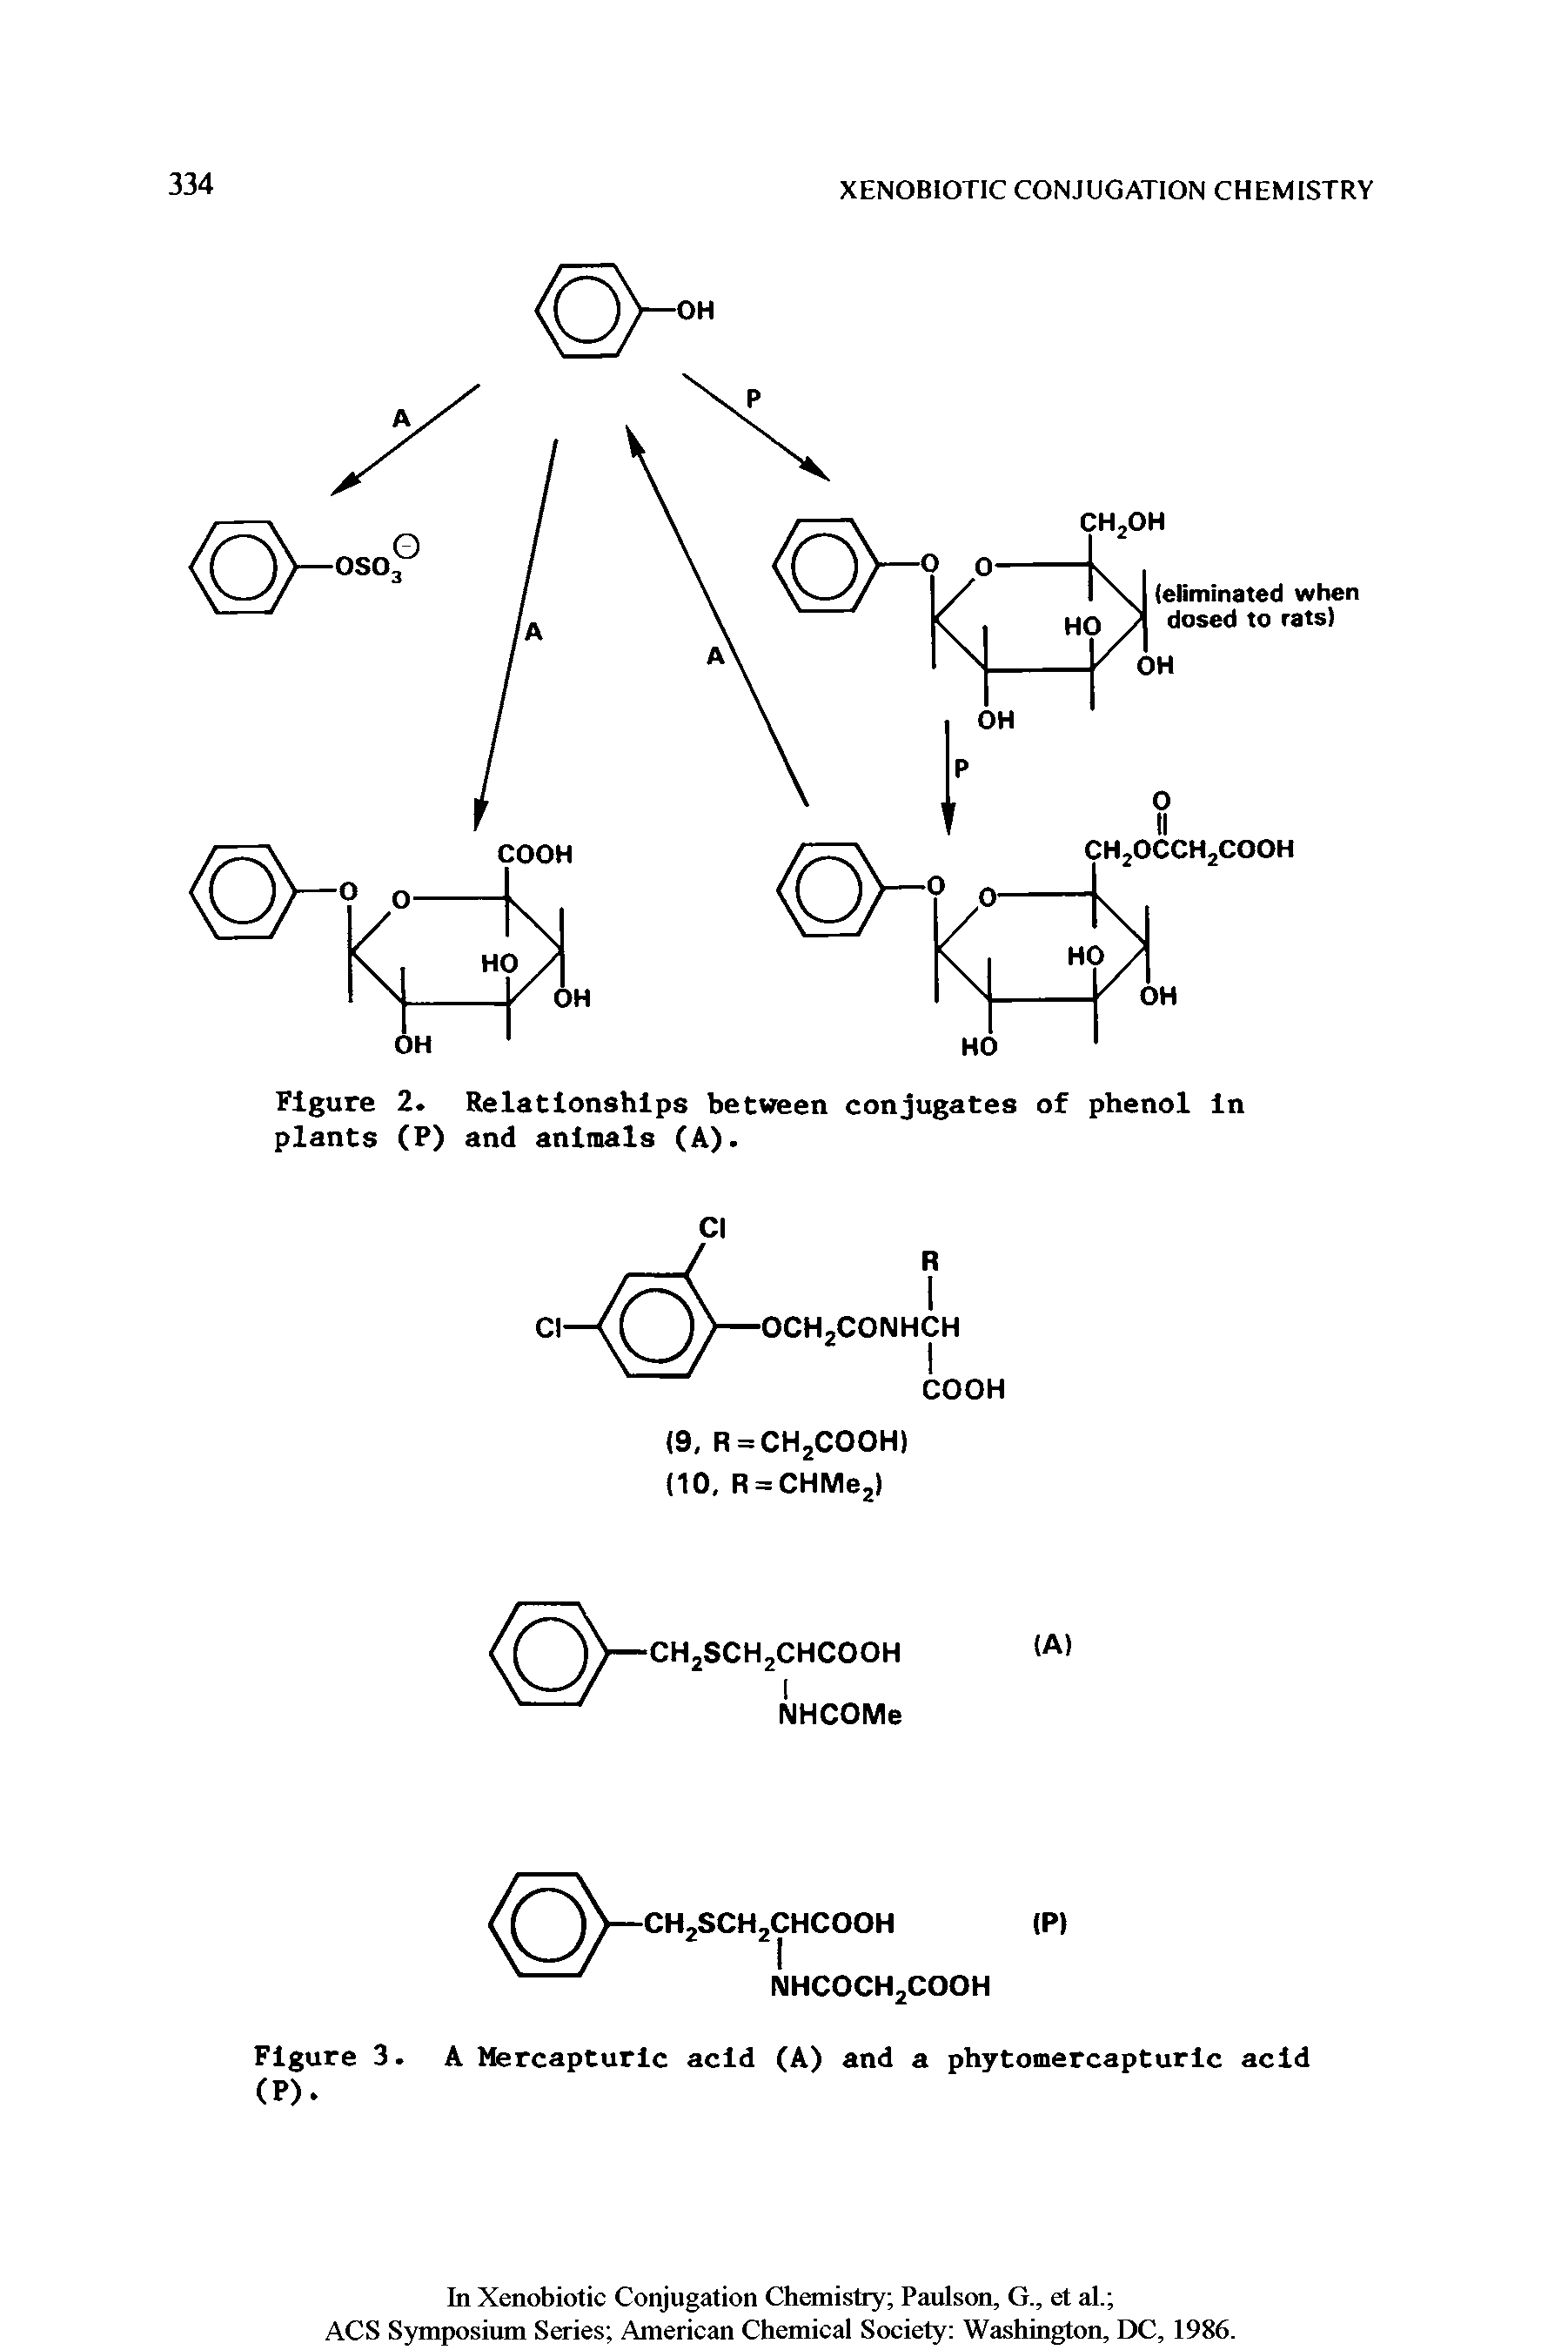 Figure 2. Relationships between conjugates of phenol in plants (P) and animals (A).